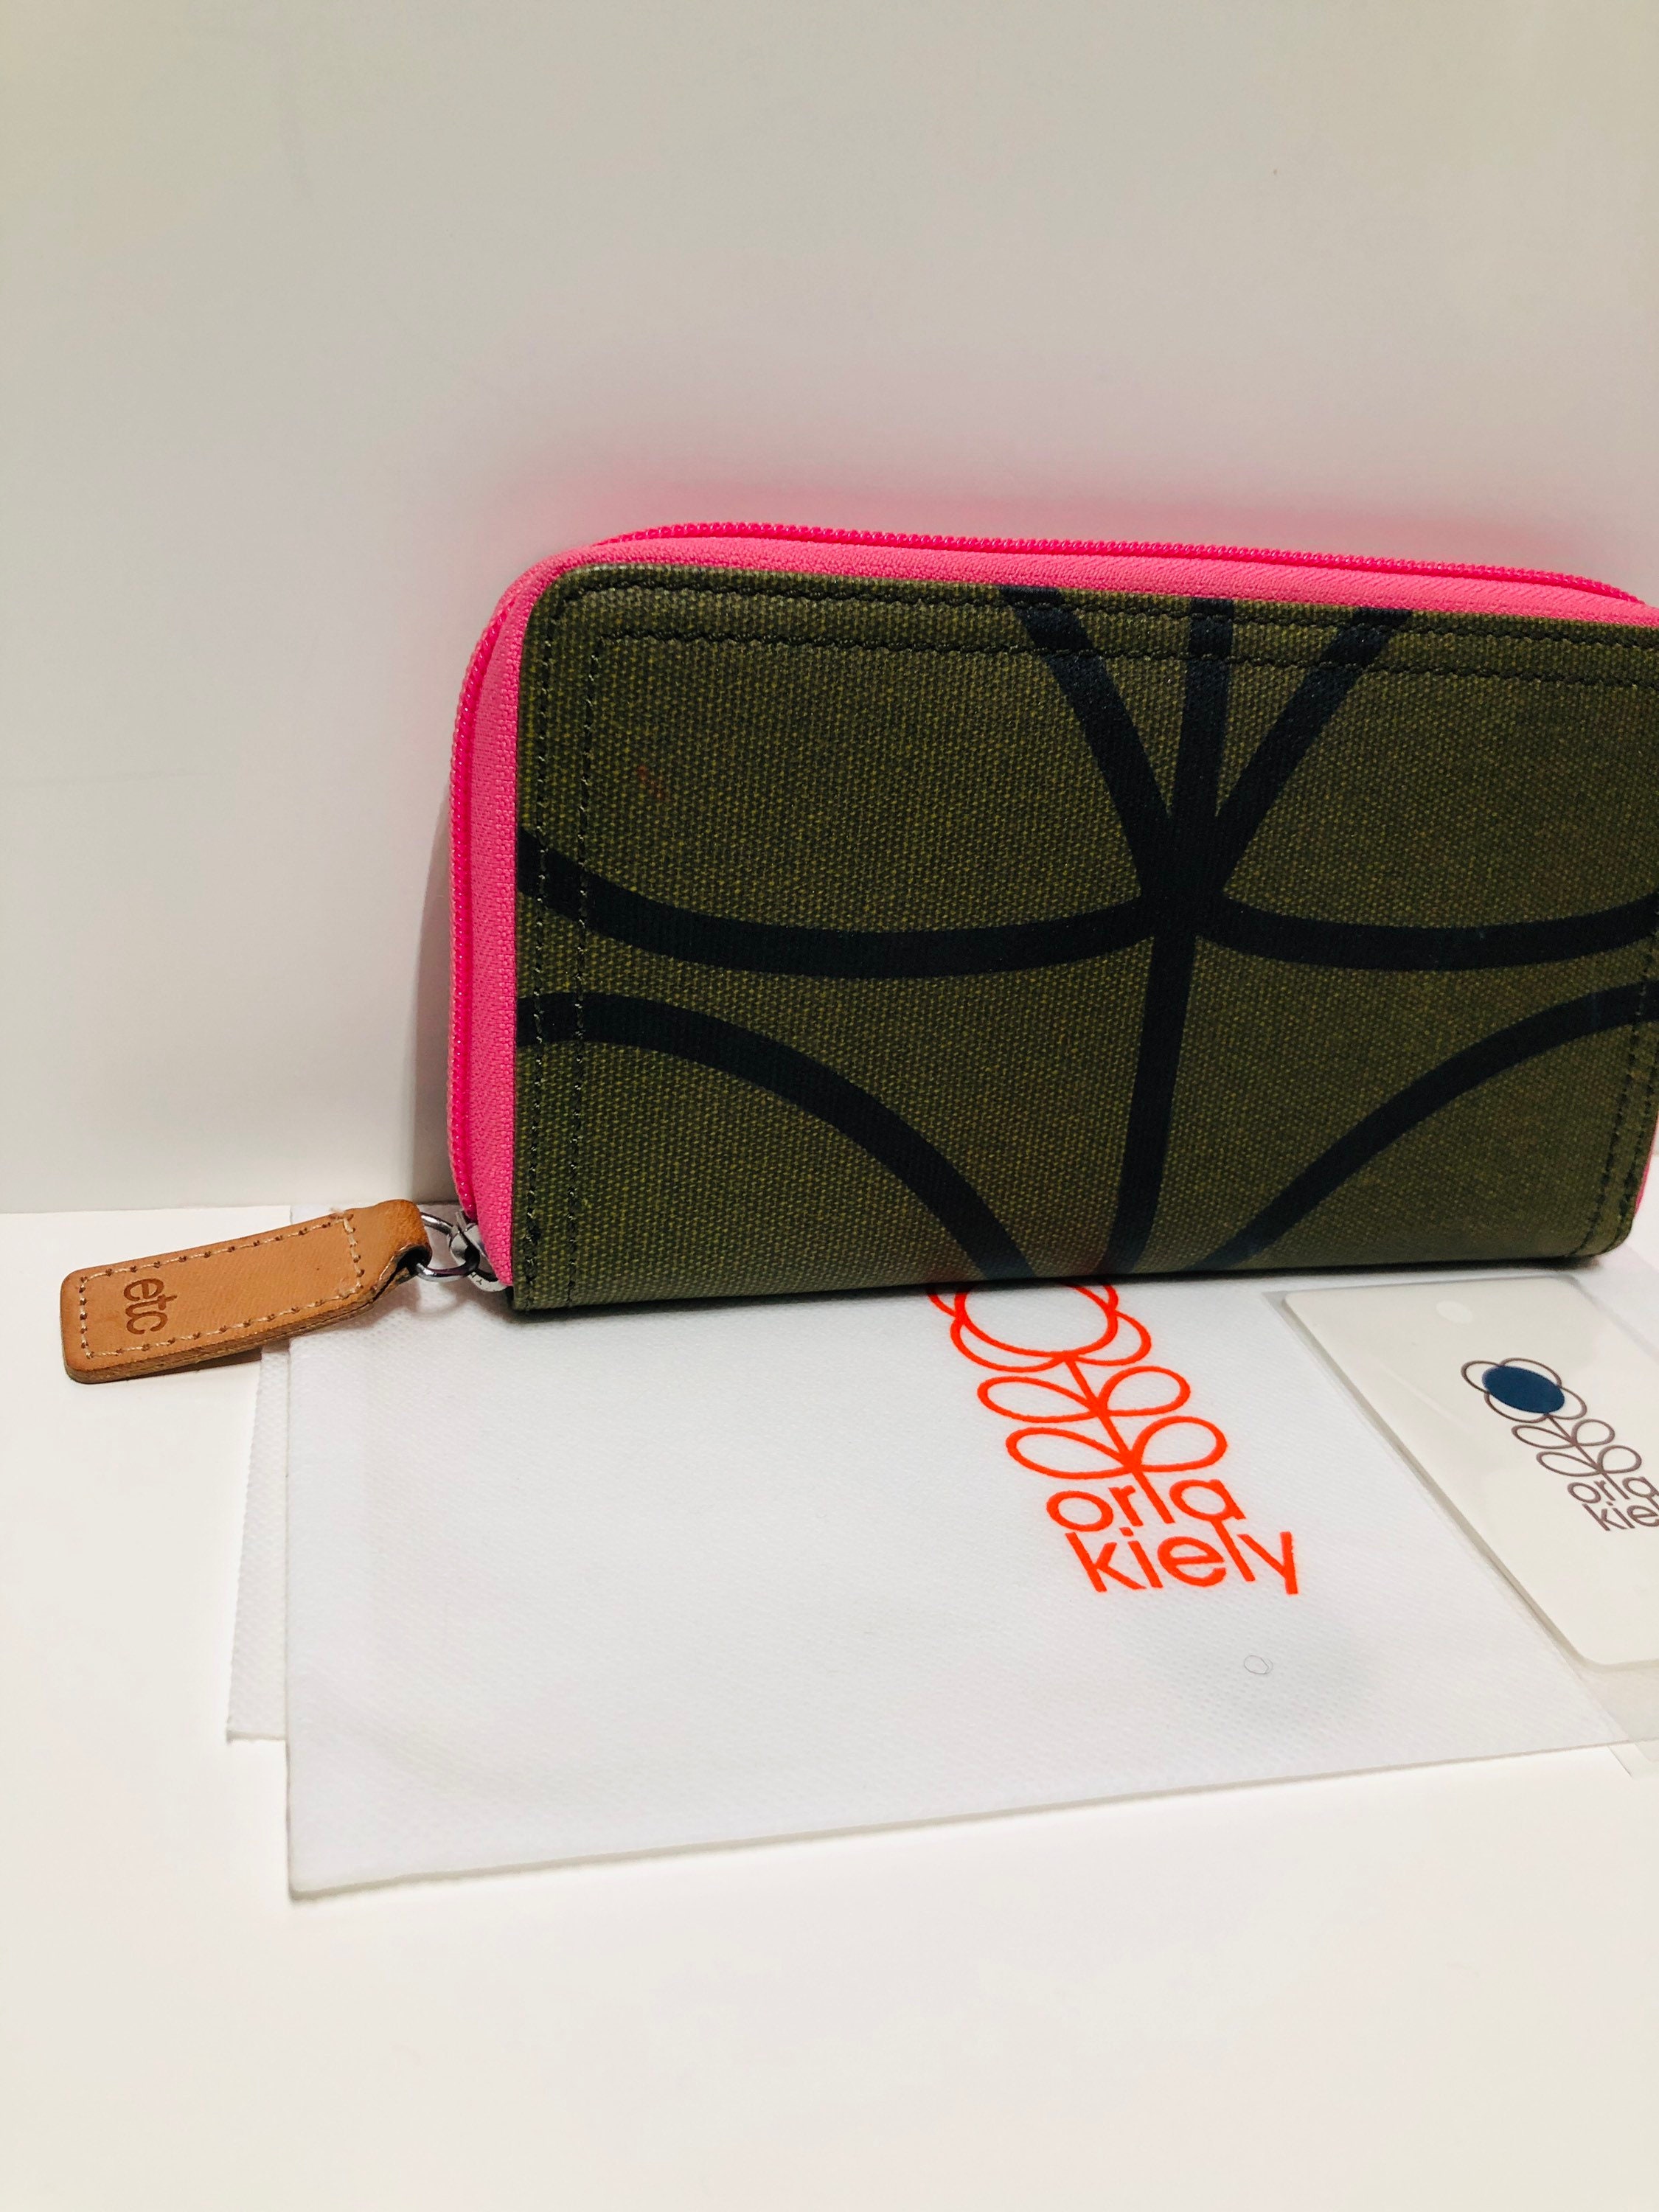 20% off Orla Kiely bags and purses this weekend at Anastasia Boutique! -  Anastasia Boutique